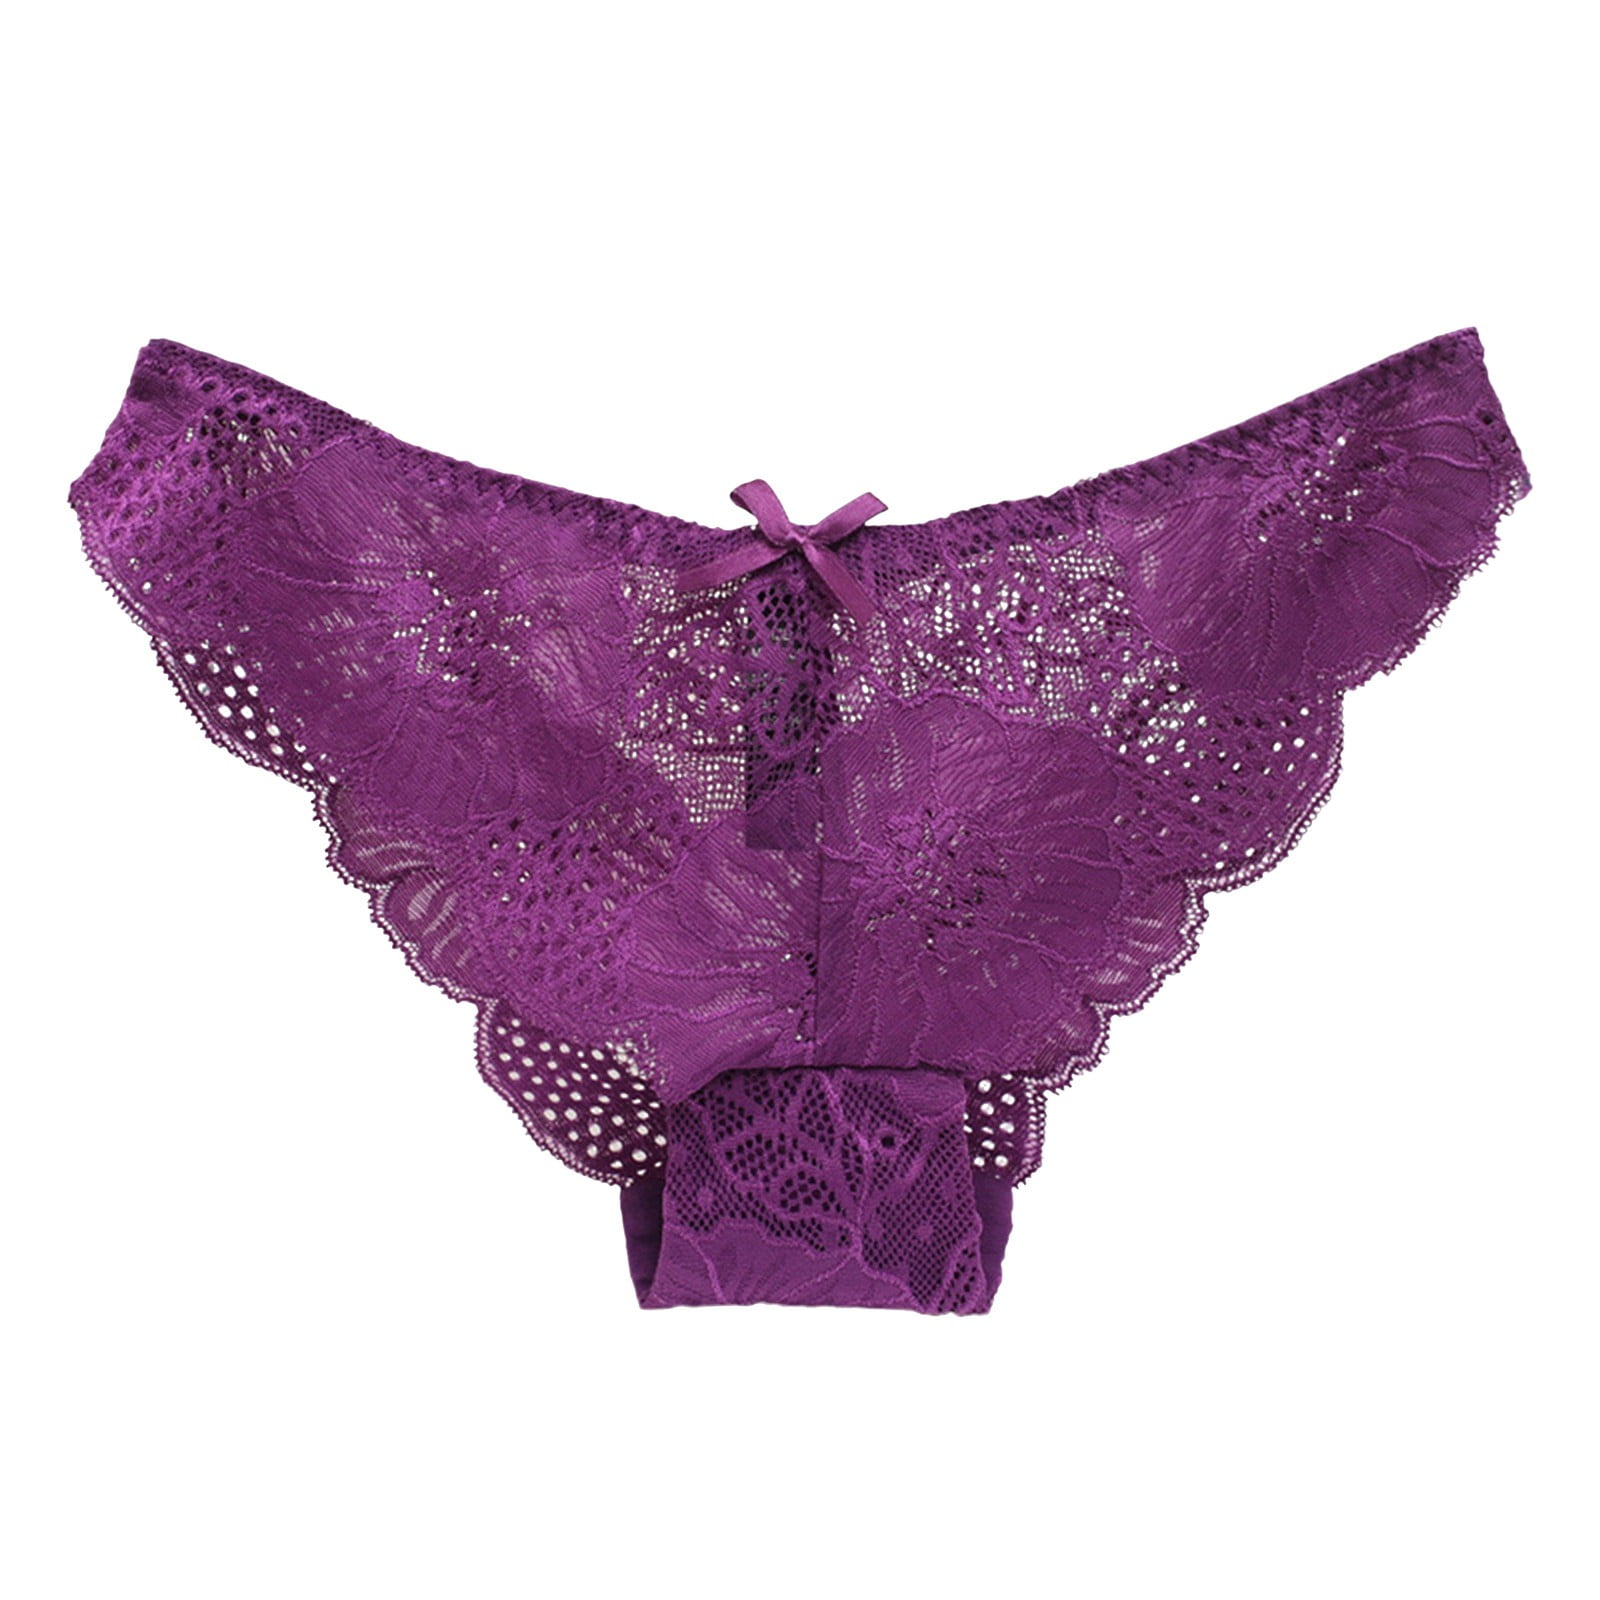 Sexy Purple High Waisted Sheer Lace Underwear Panties Plus Size 8-18  Lingerie